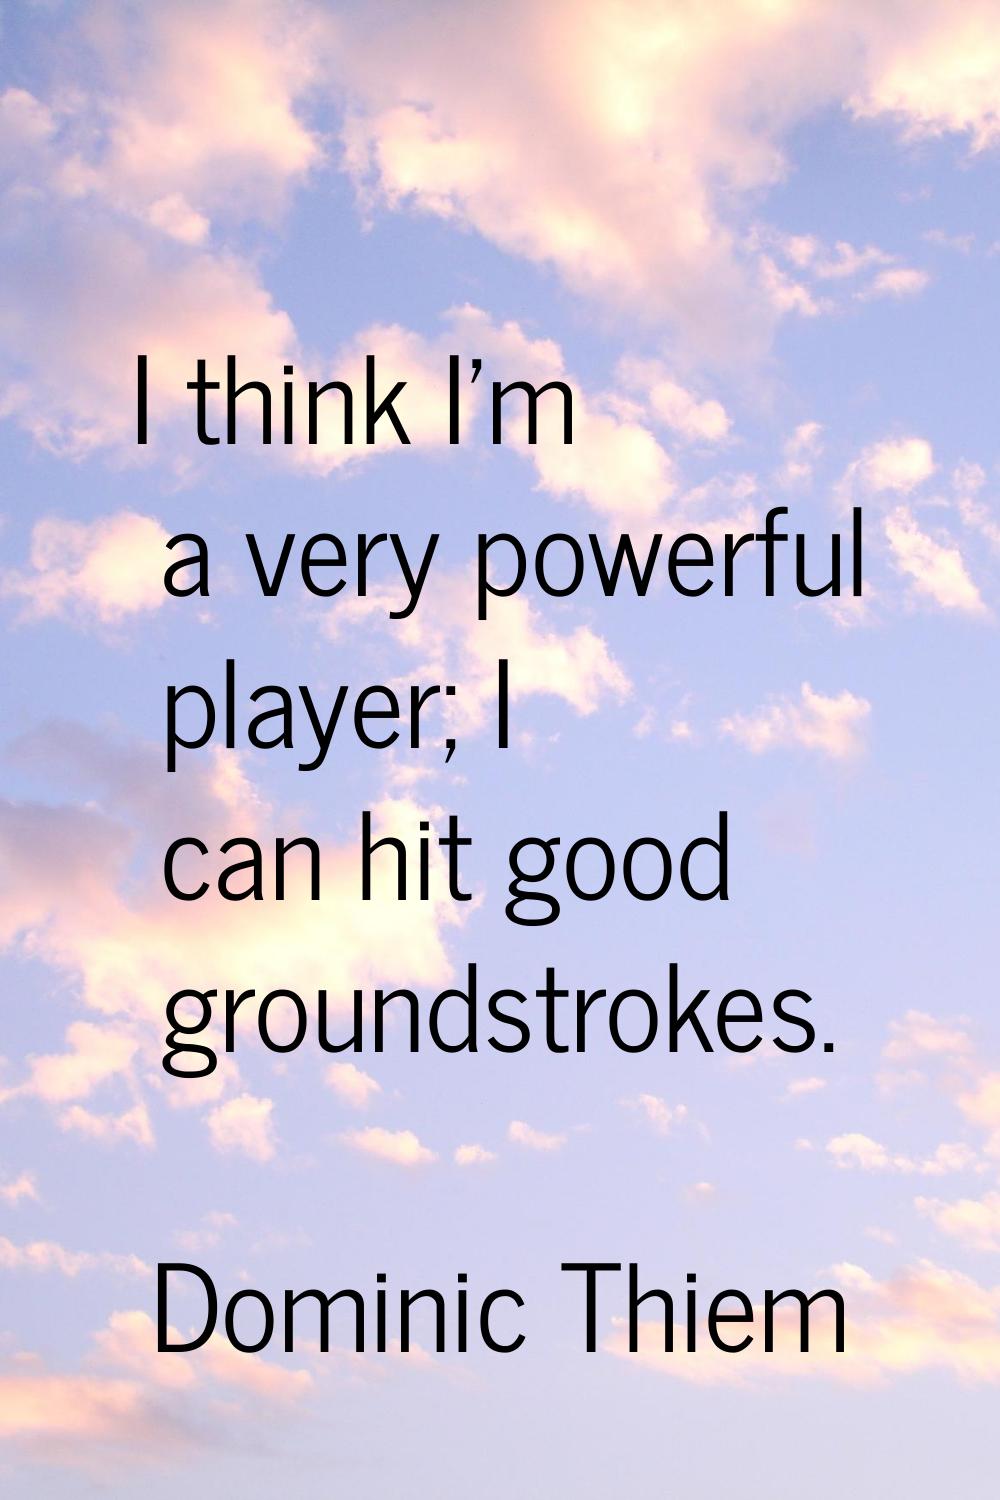 I think I'm a very powerful player; I can hit good groundstrokes.